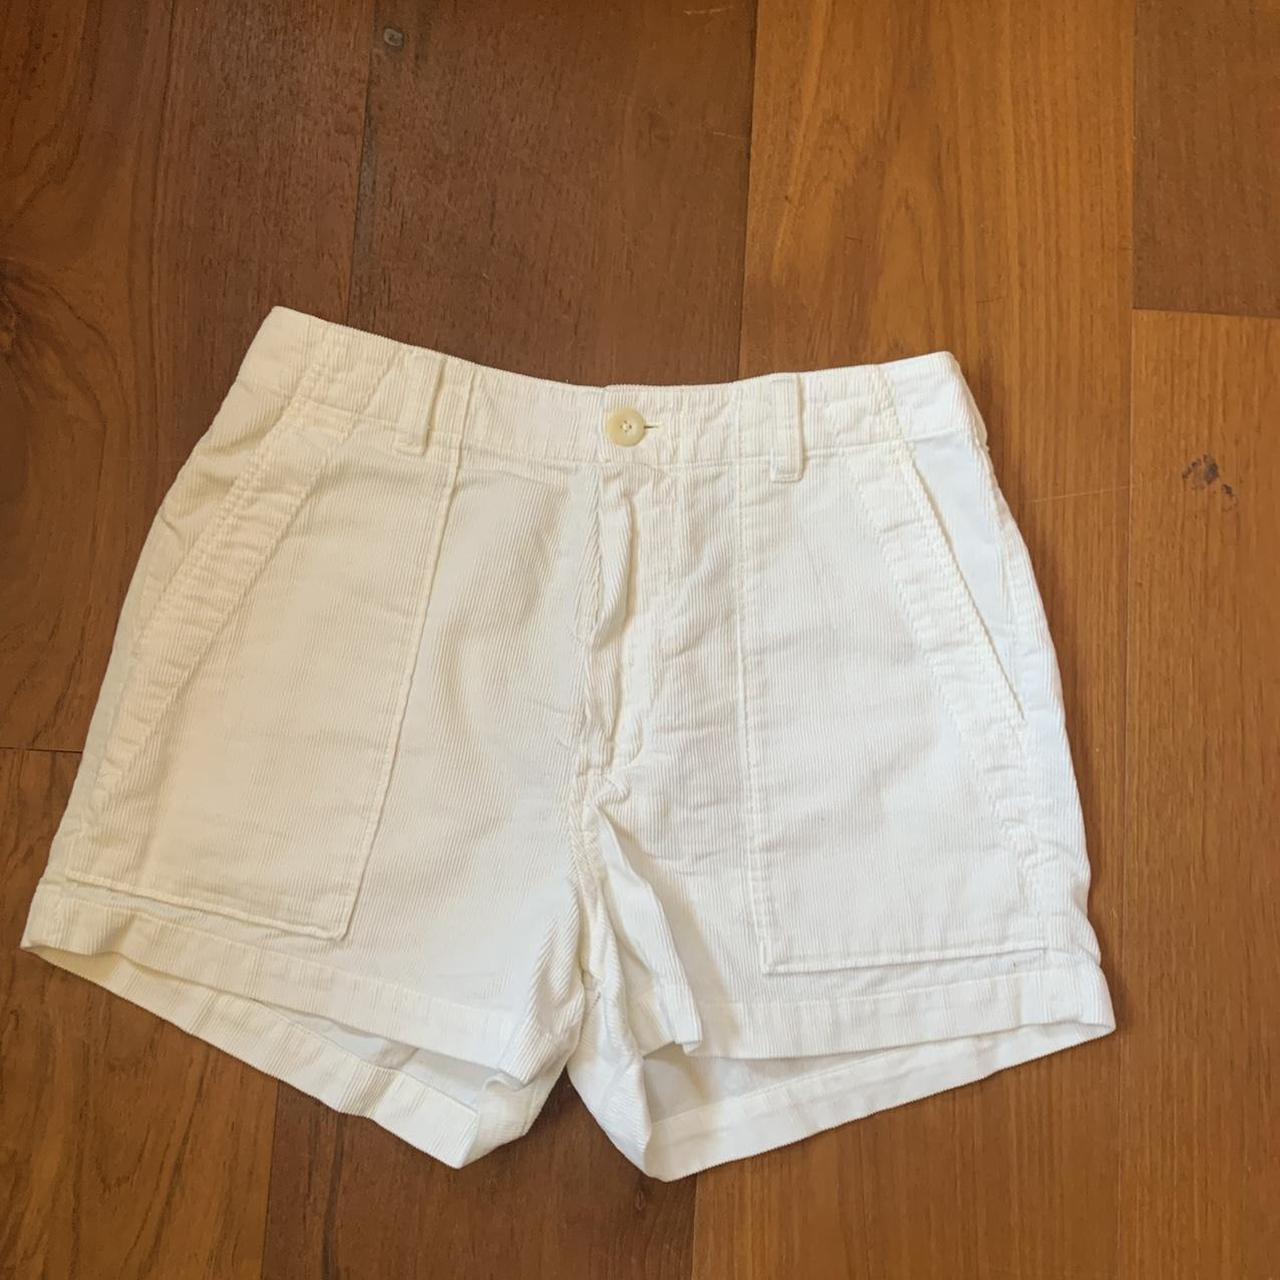 Outerknown organic cotton corduroy shorts in... - Depop